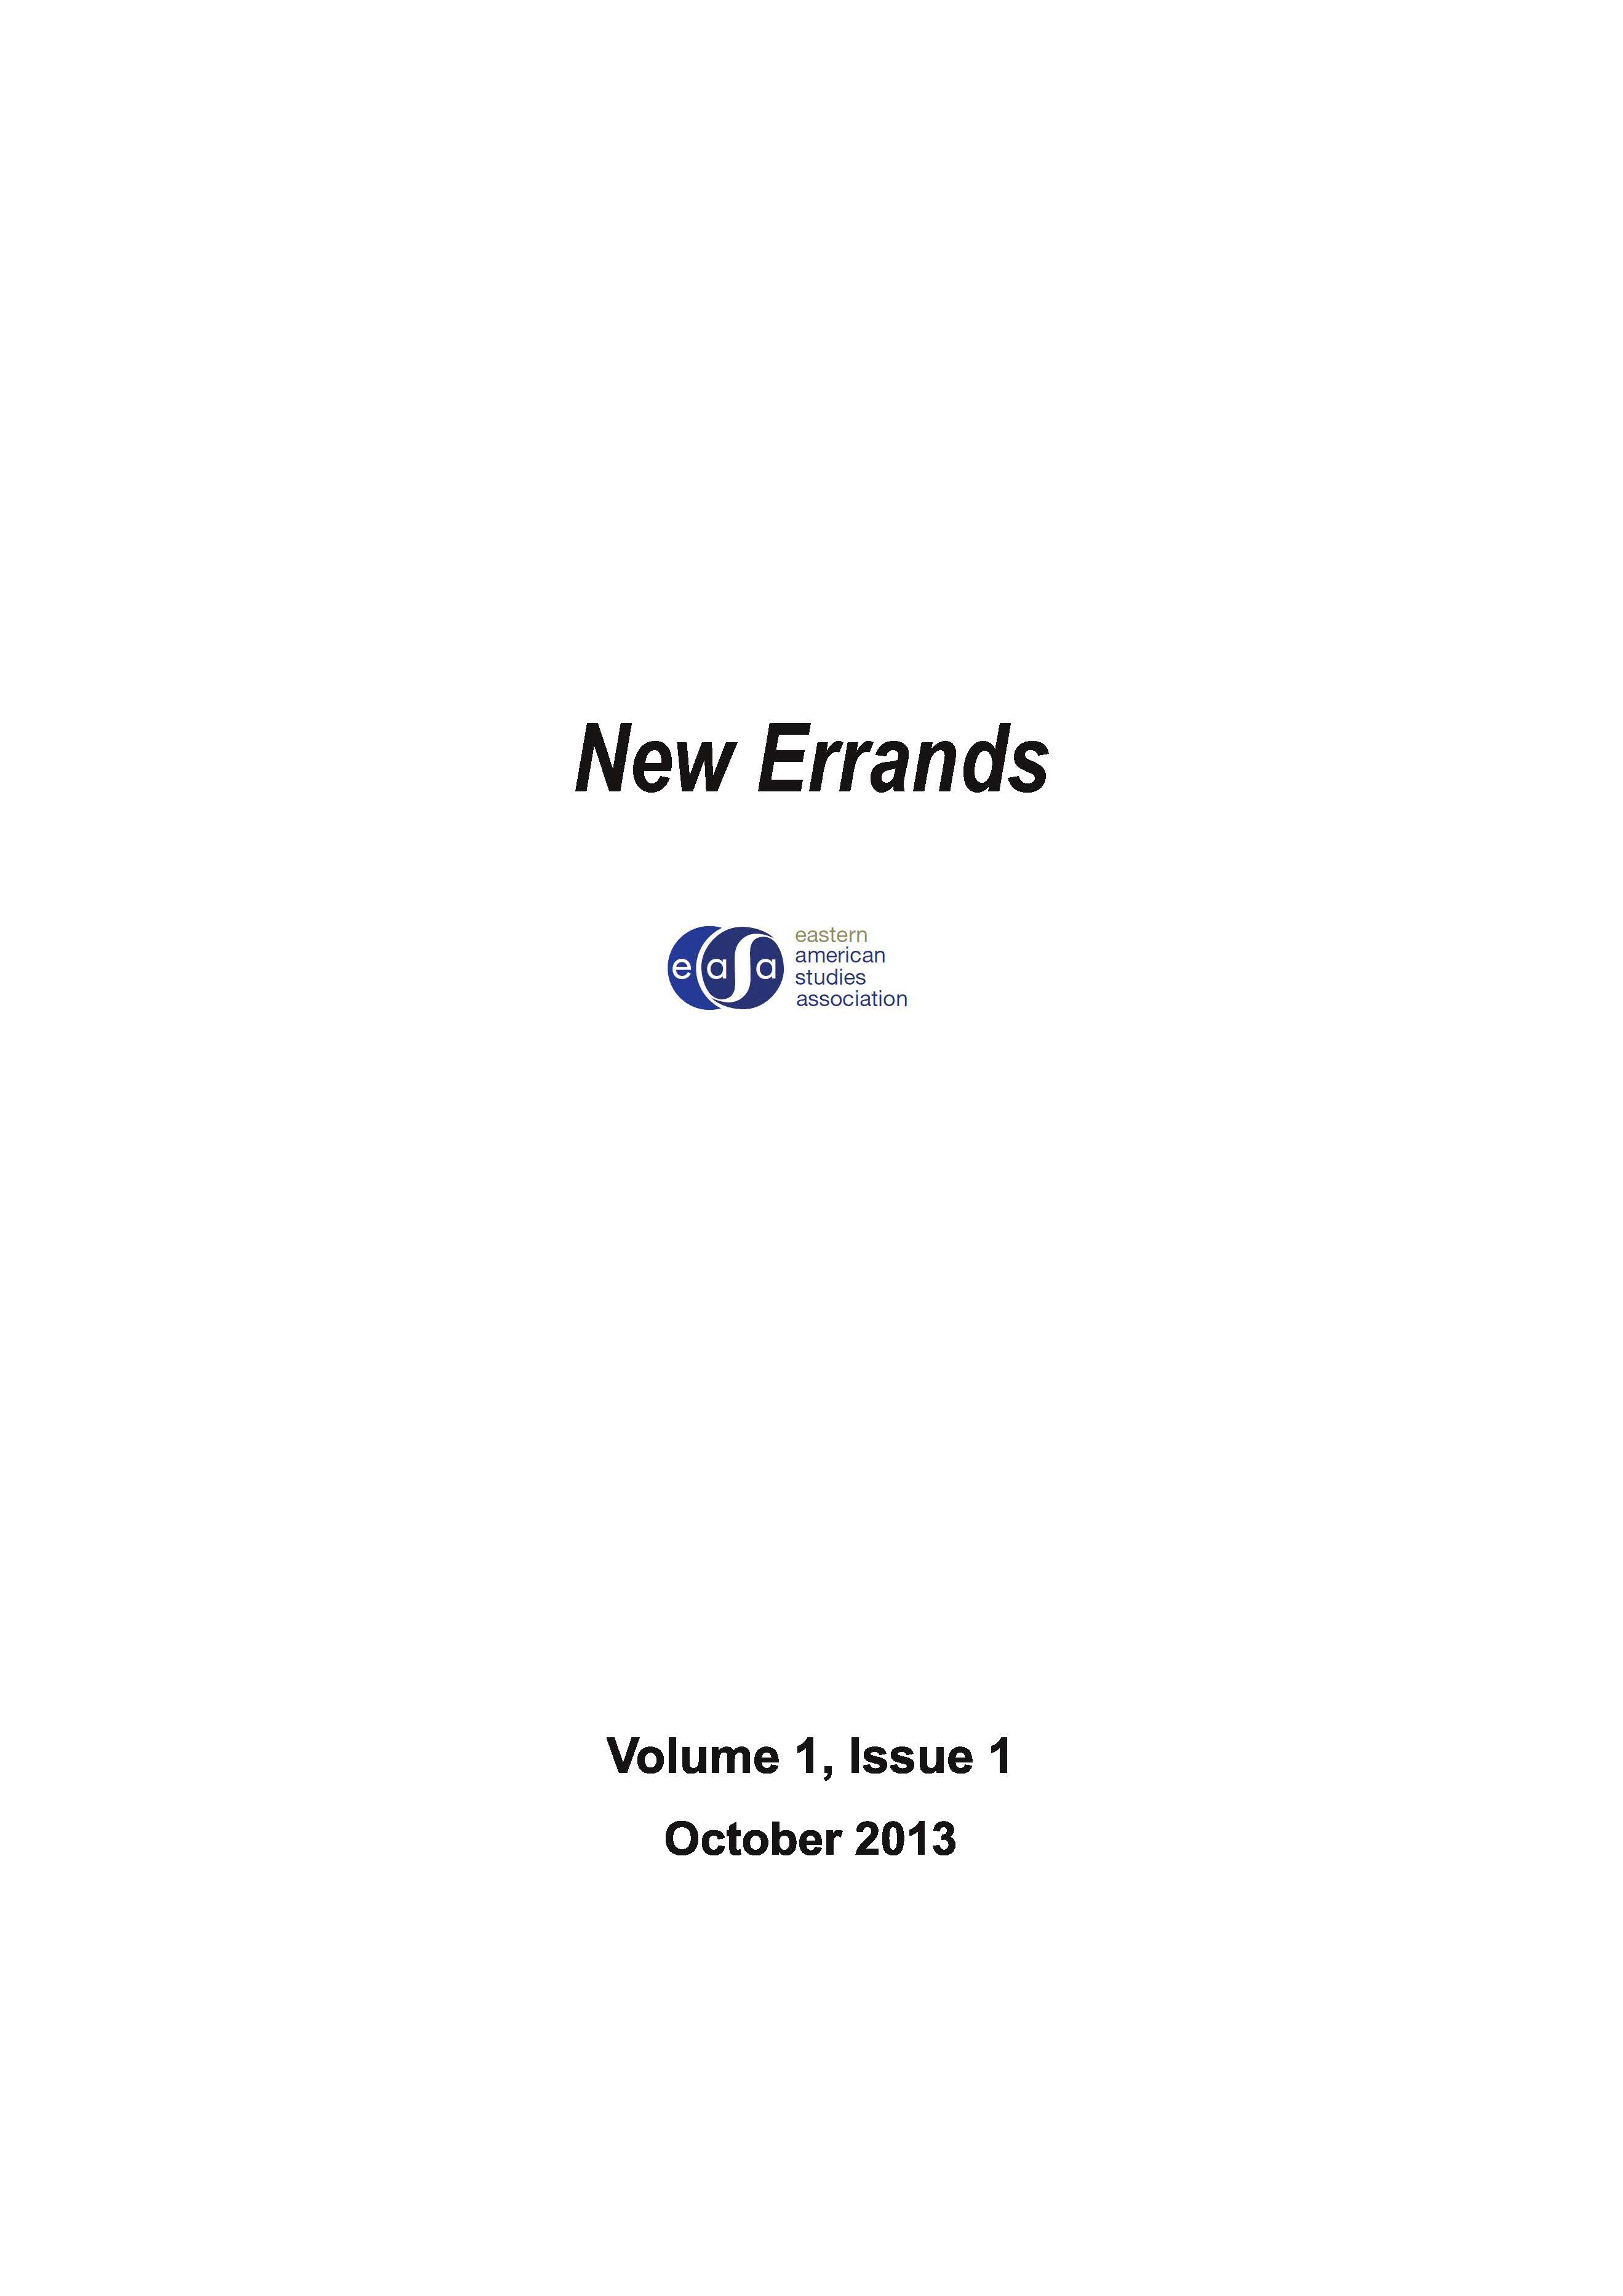 					View New Errands Volume 1 Issue 1 (Fall 2013)
				